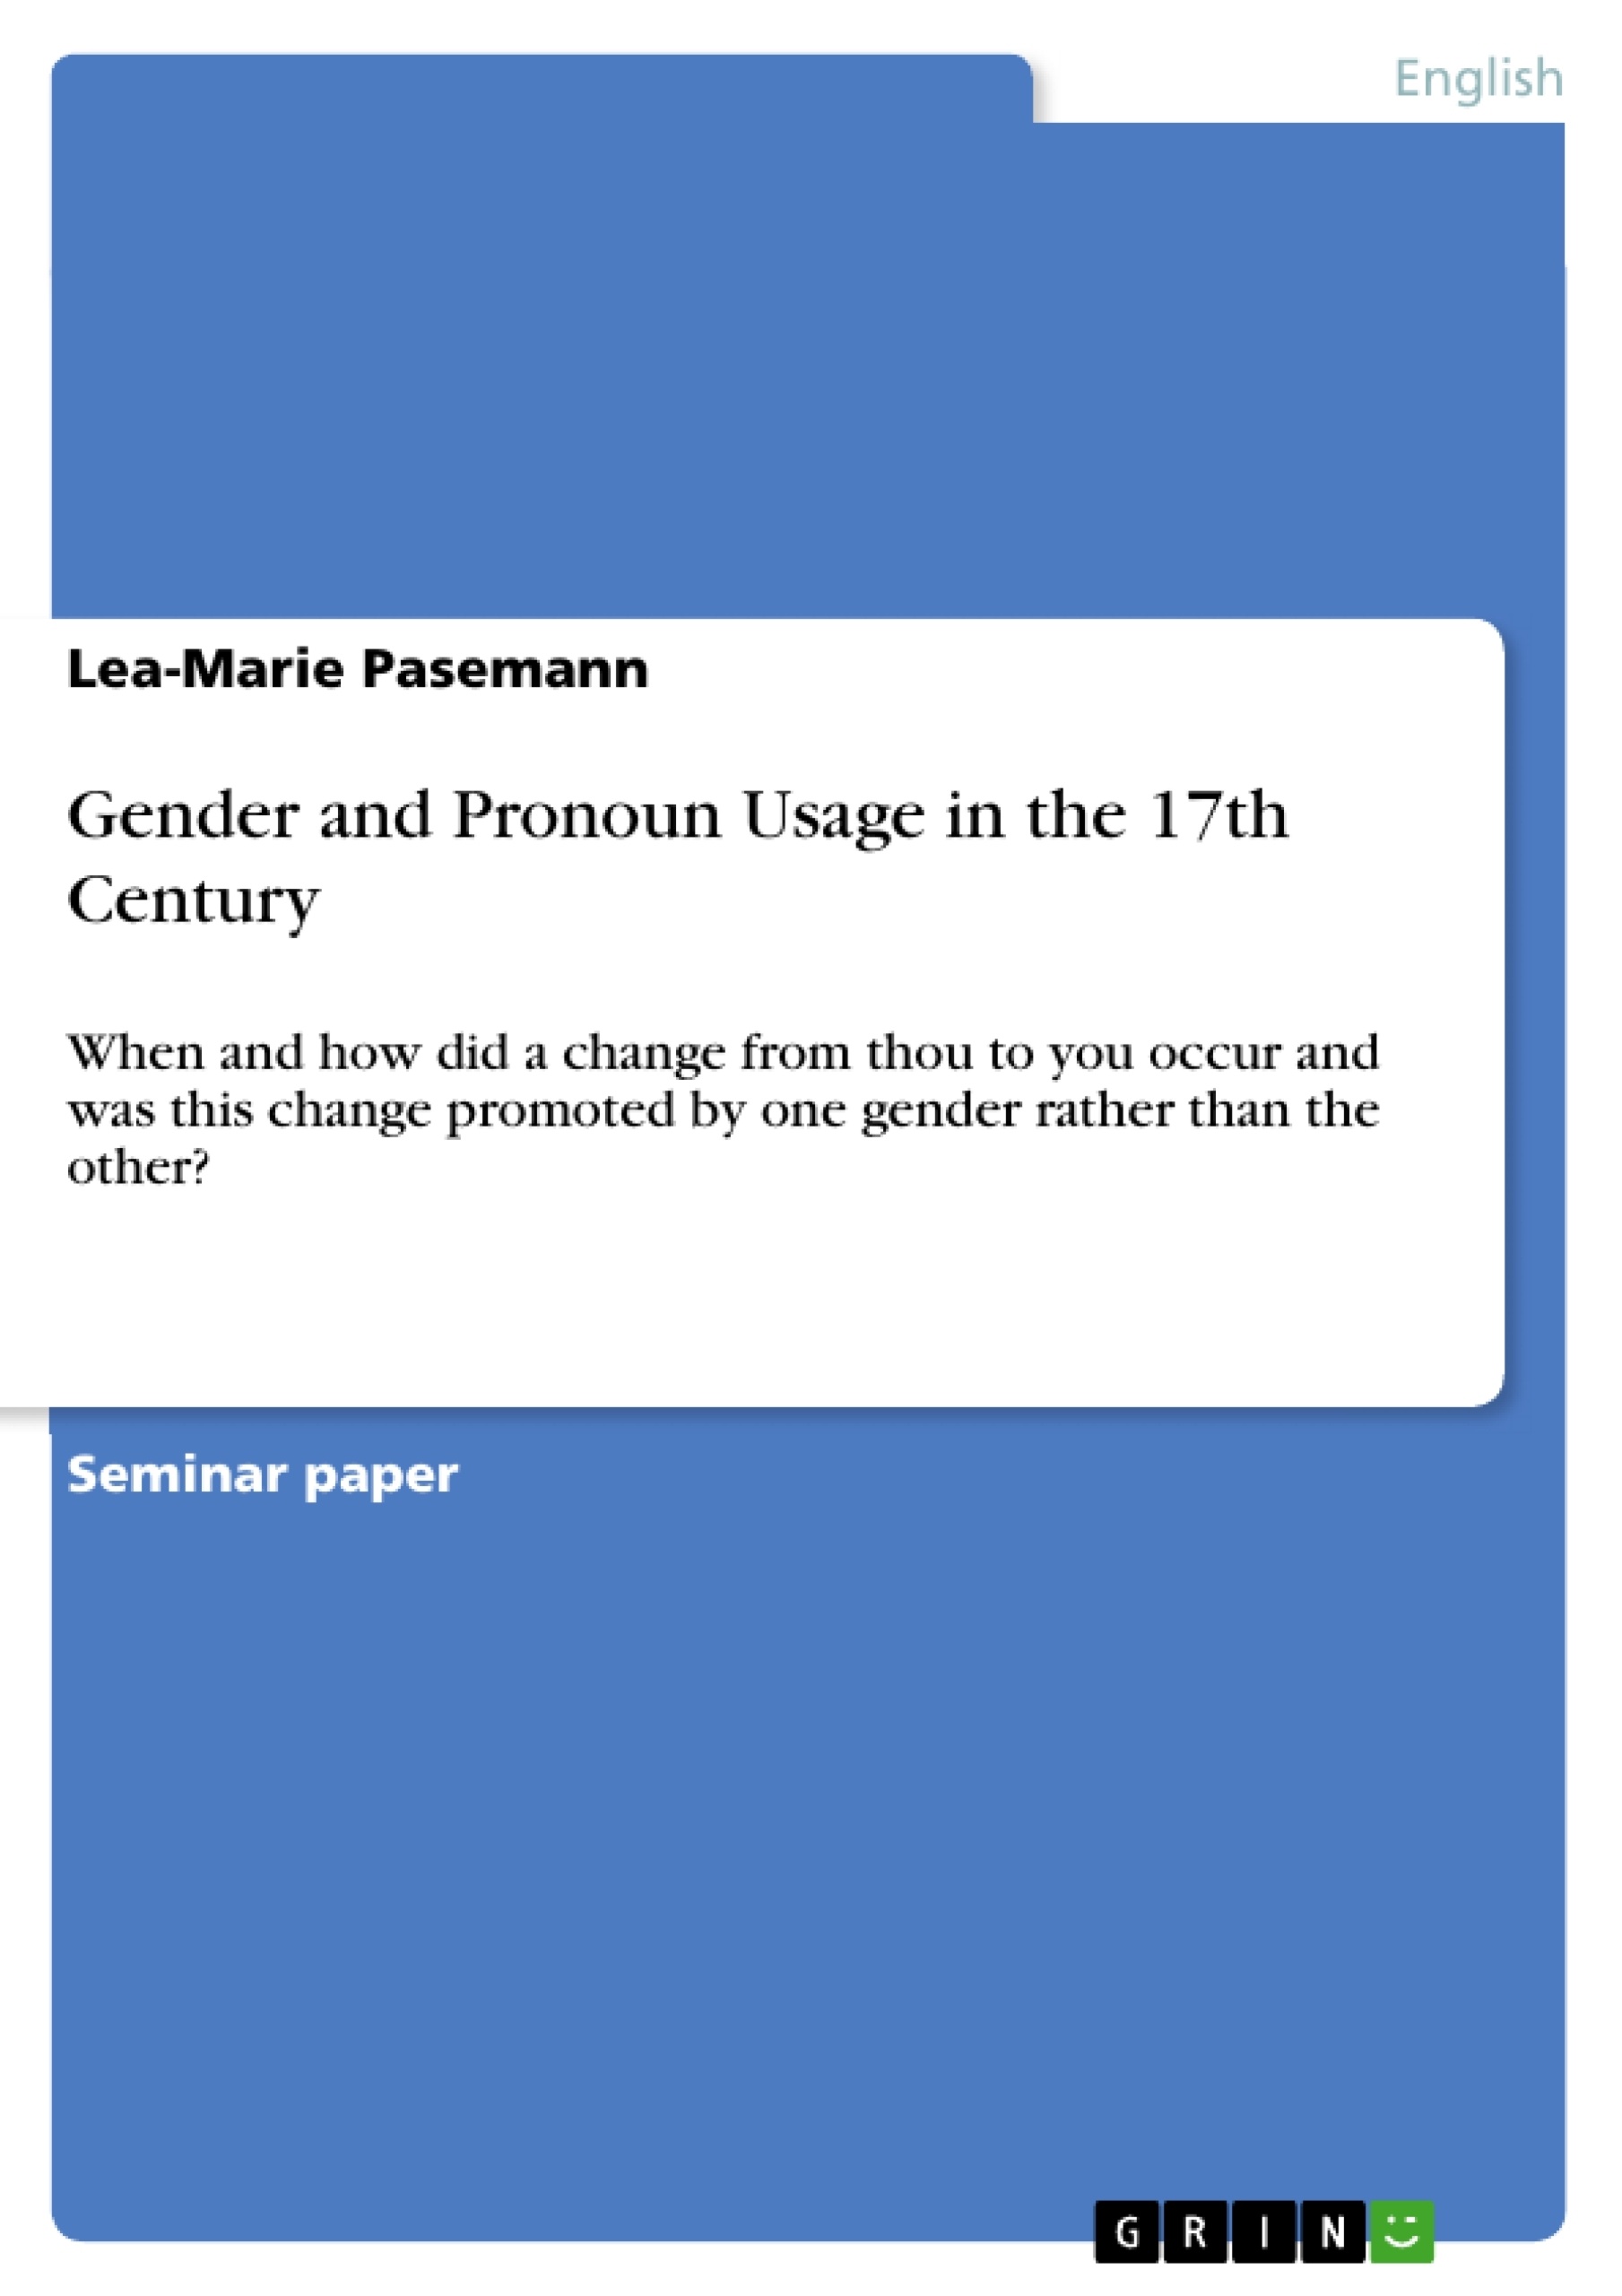 Titre: Gender and Pronoun Usage in the 17th Century